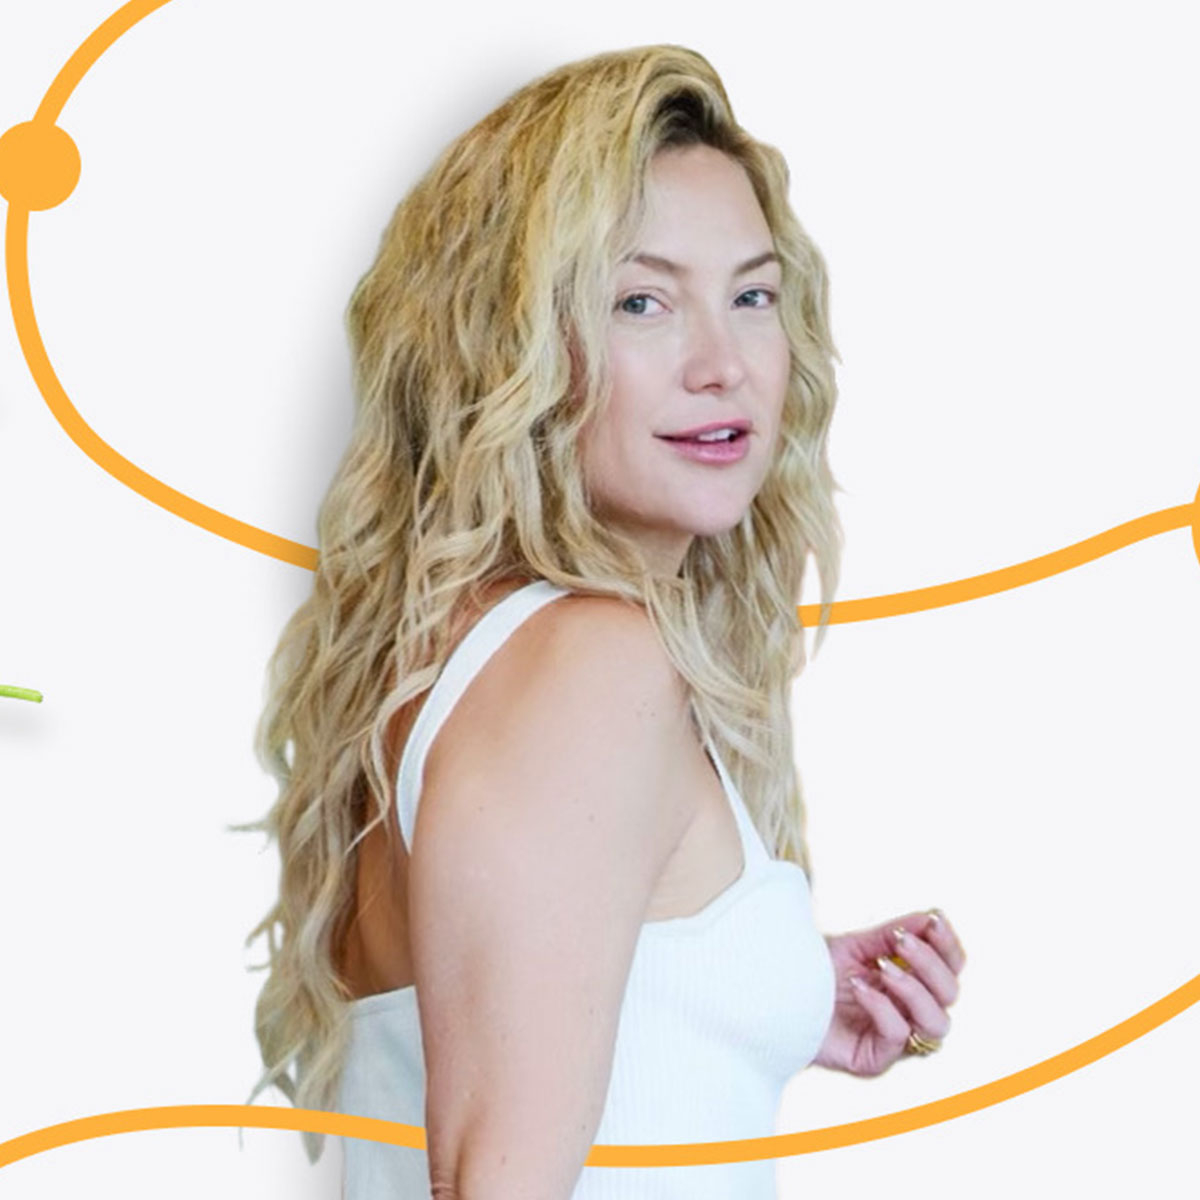 See Kate Hudson & Her Trainer’s Tips for Sticking to Your Health Goals